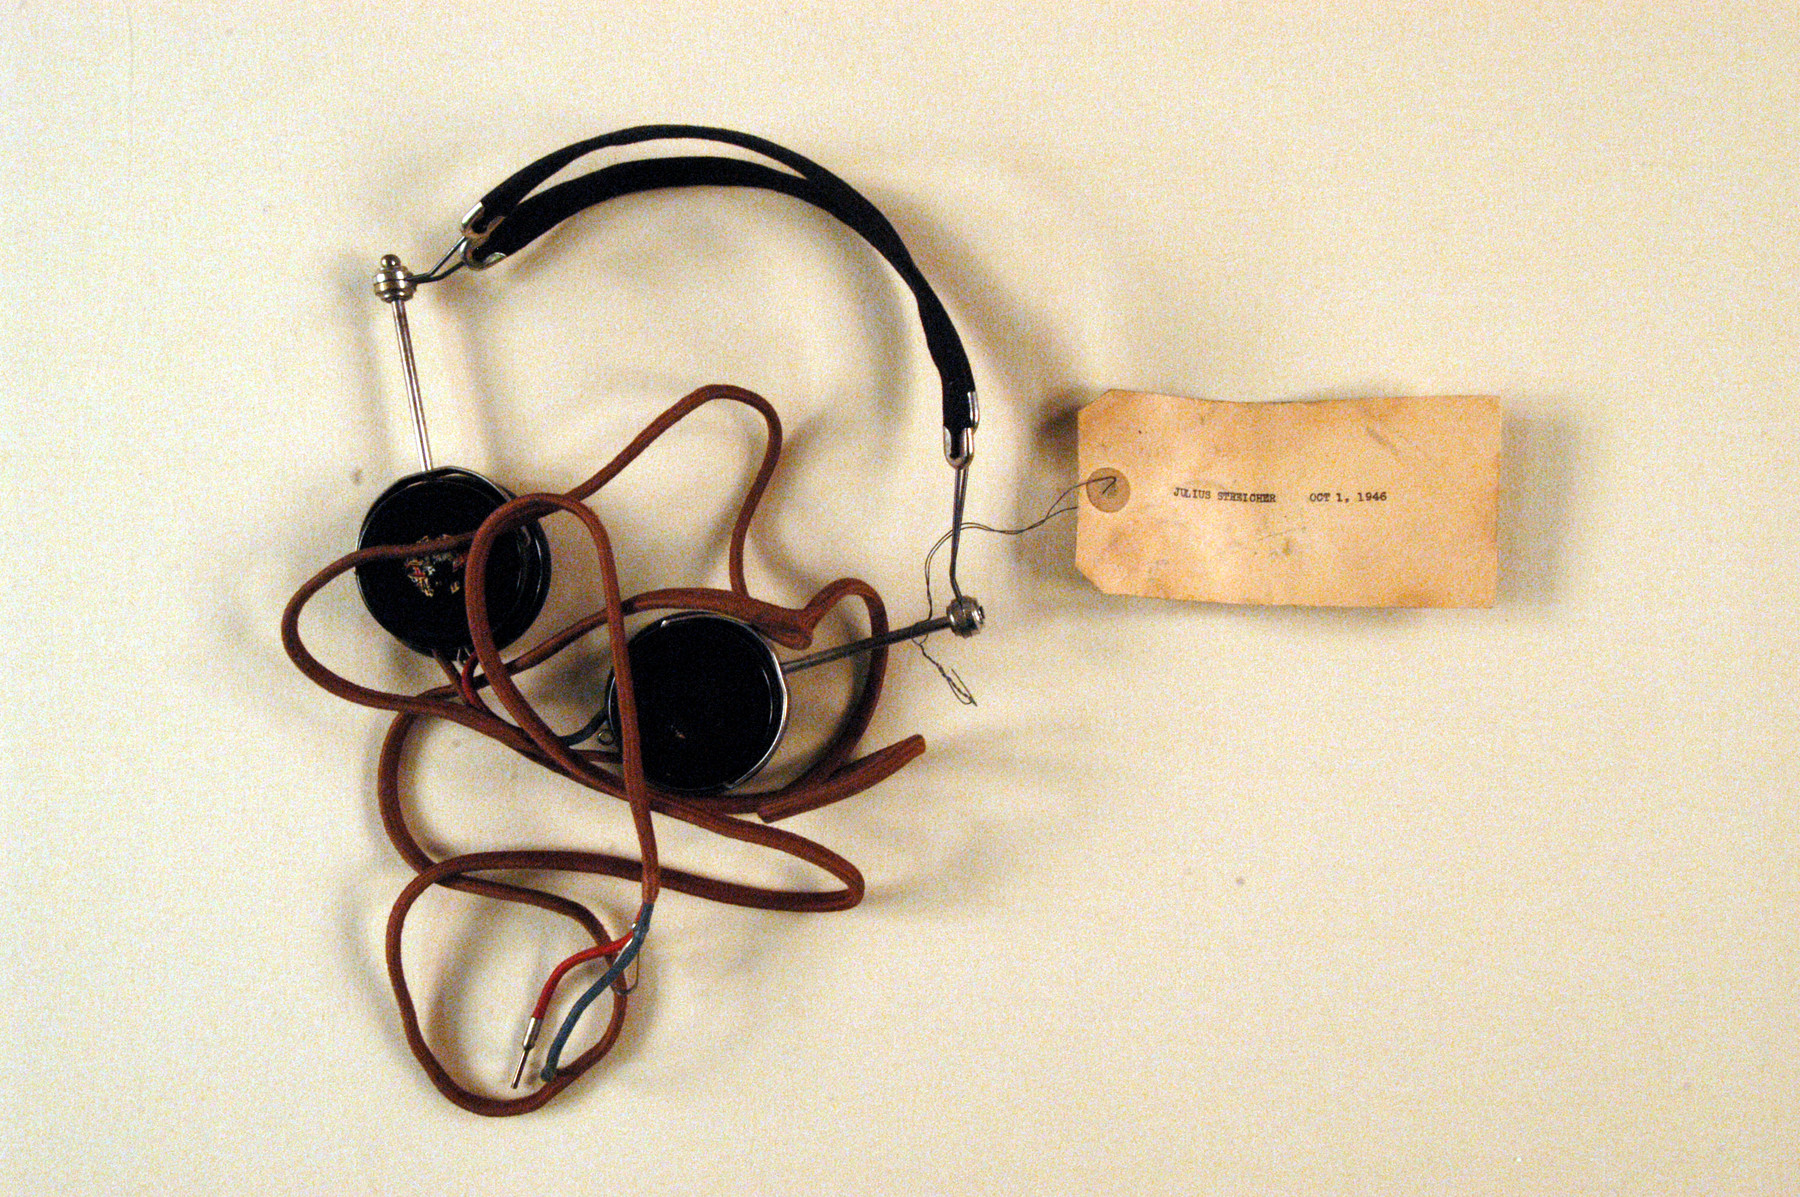 Headphone worn by Julius Streicher, former editor of Der Stuermer, a defendant in the International Military Tribunal in Nuremberg.  A tag with his name is attached to the headphone.